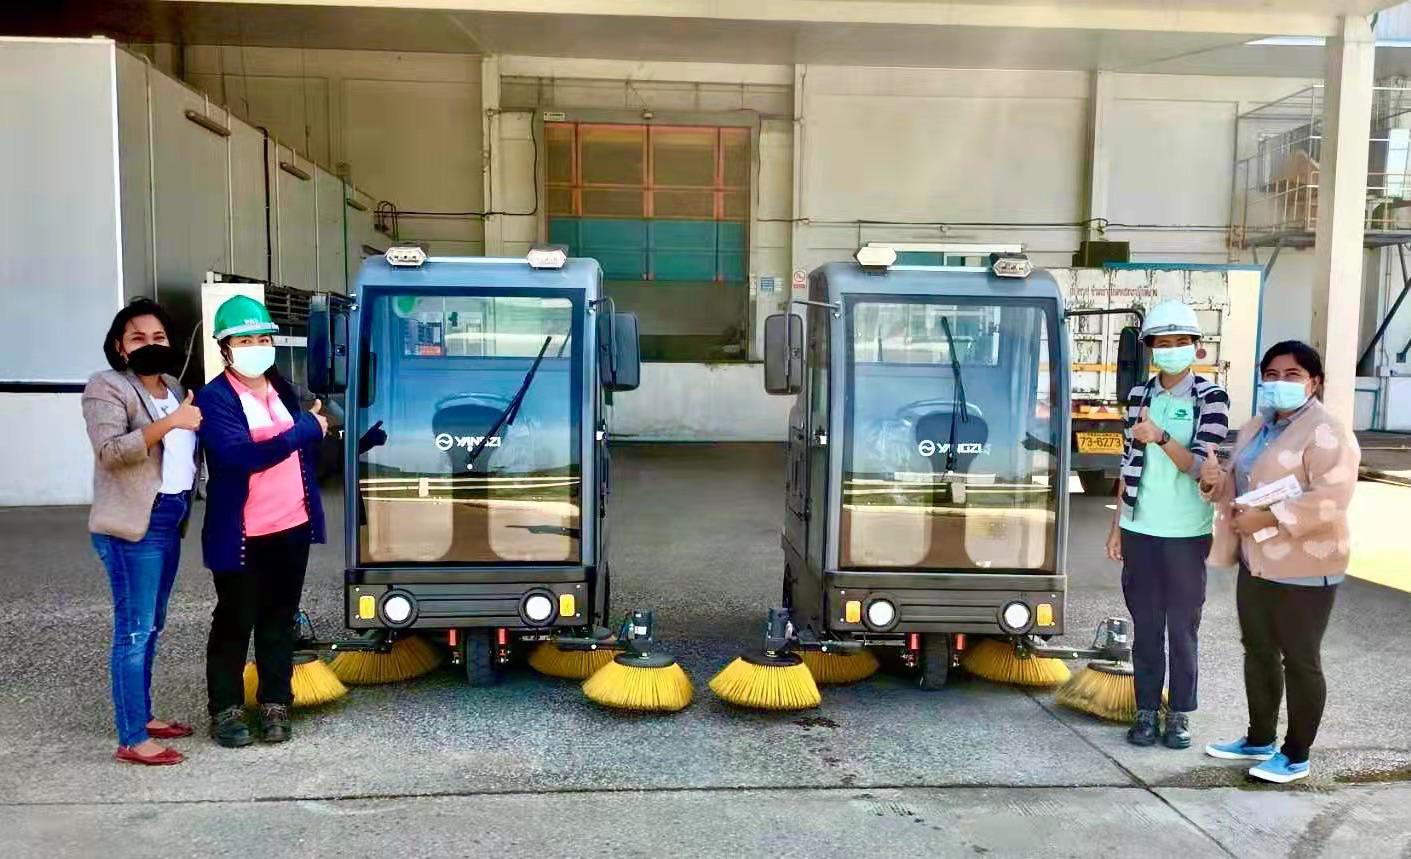 Hotel Tile Cleaner Wash Machine And Dryer Walk Behind Commercial Floor Scrubber Polishing Machine